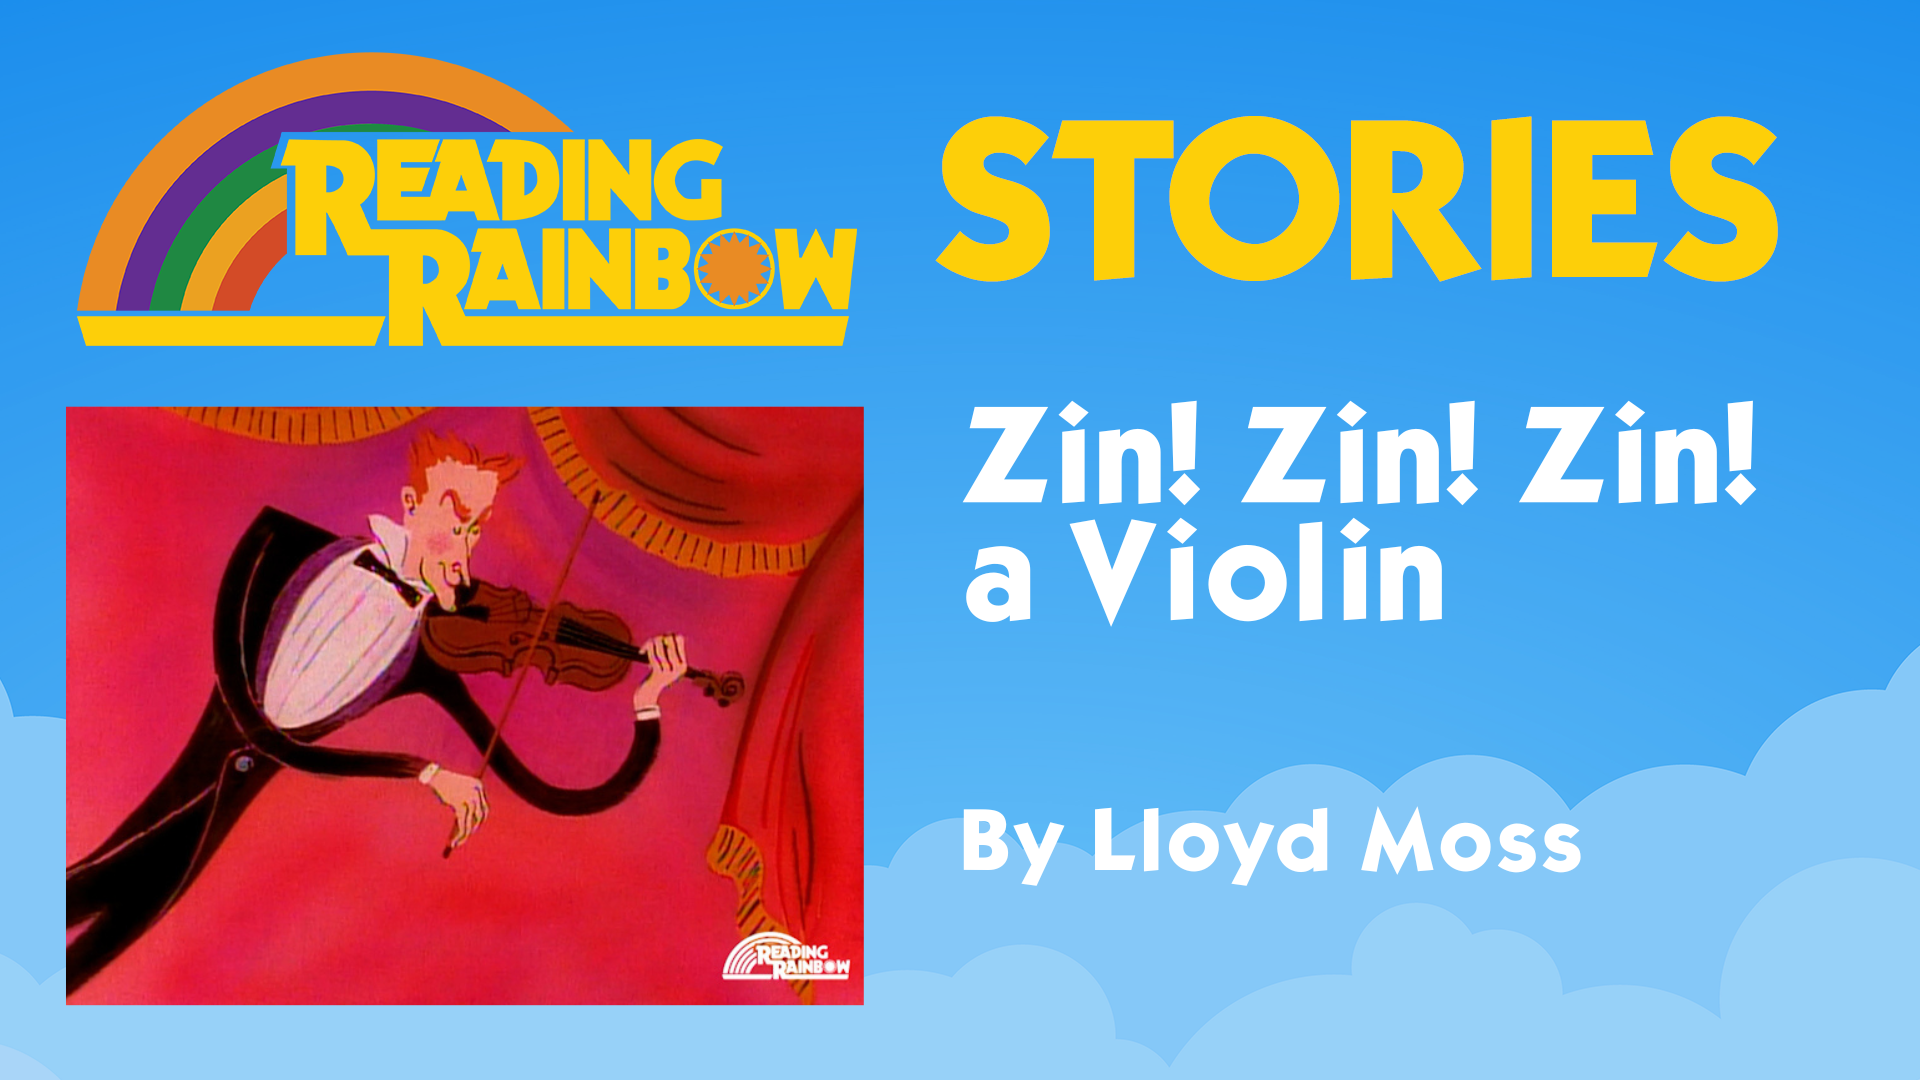 A graphic with a blue background and the cover of a children's book with a violin player against a red background.